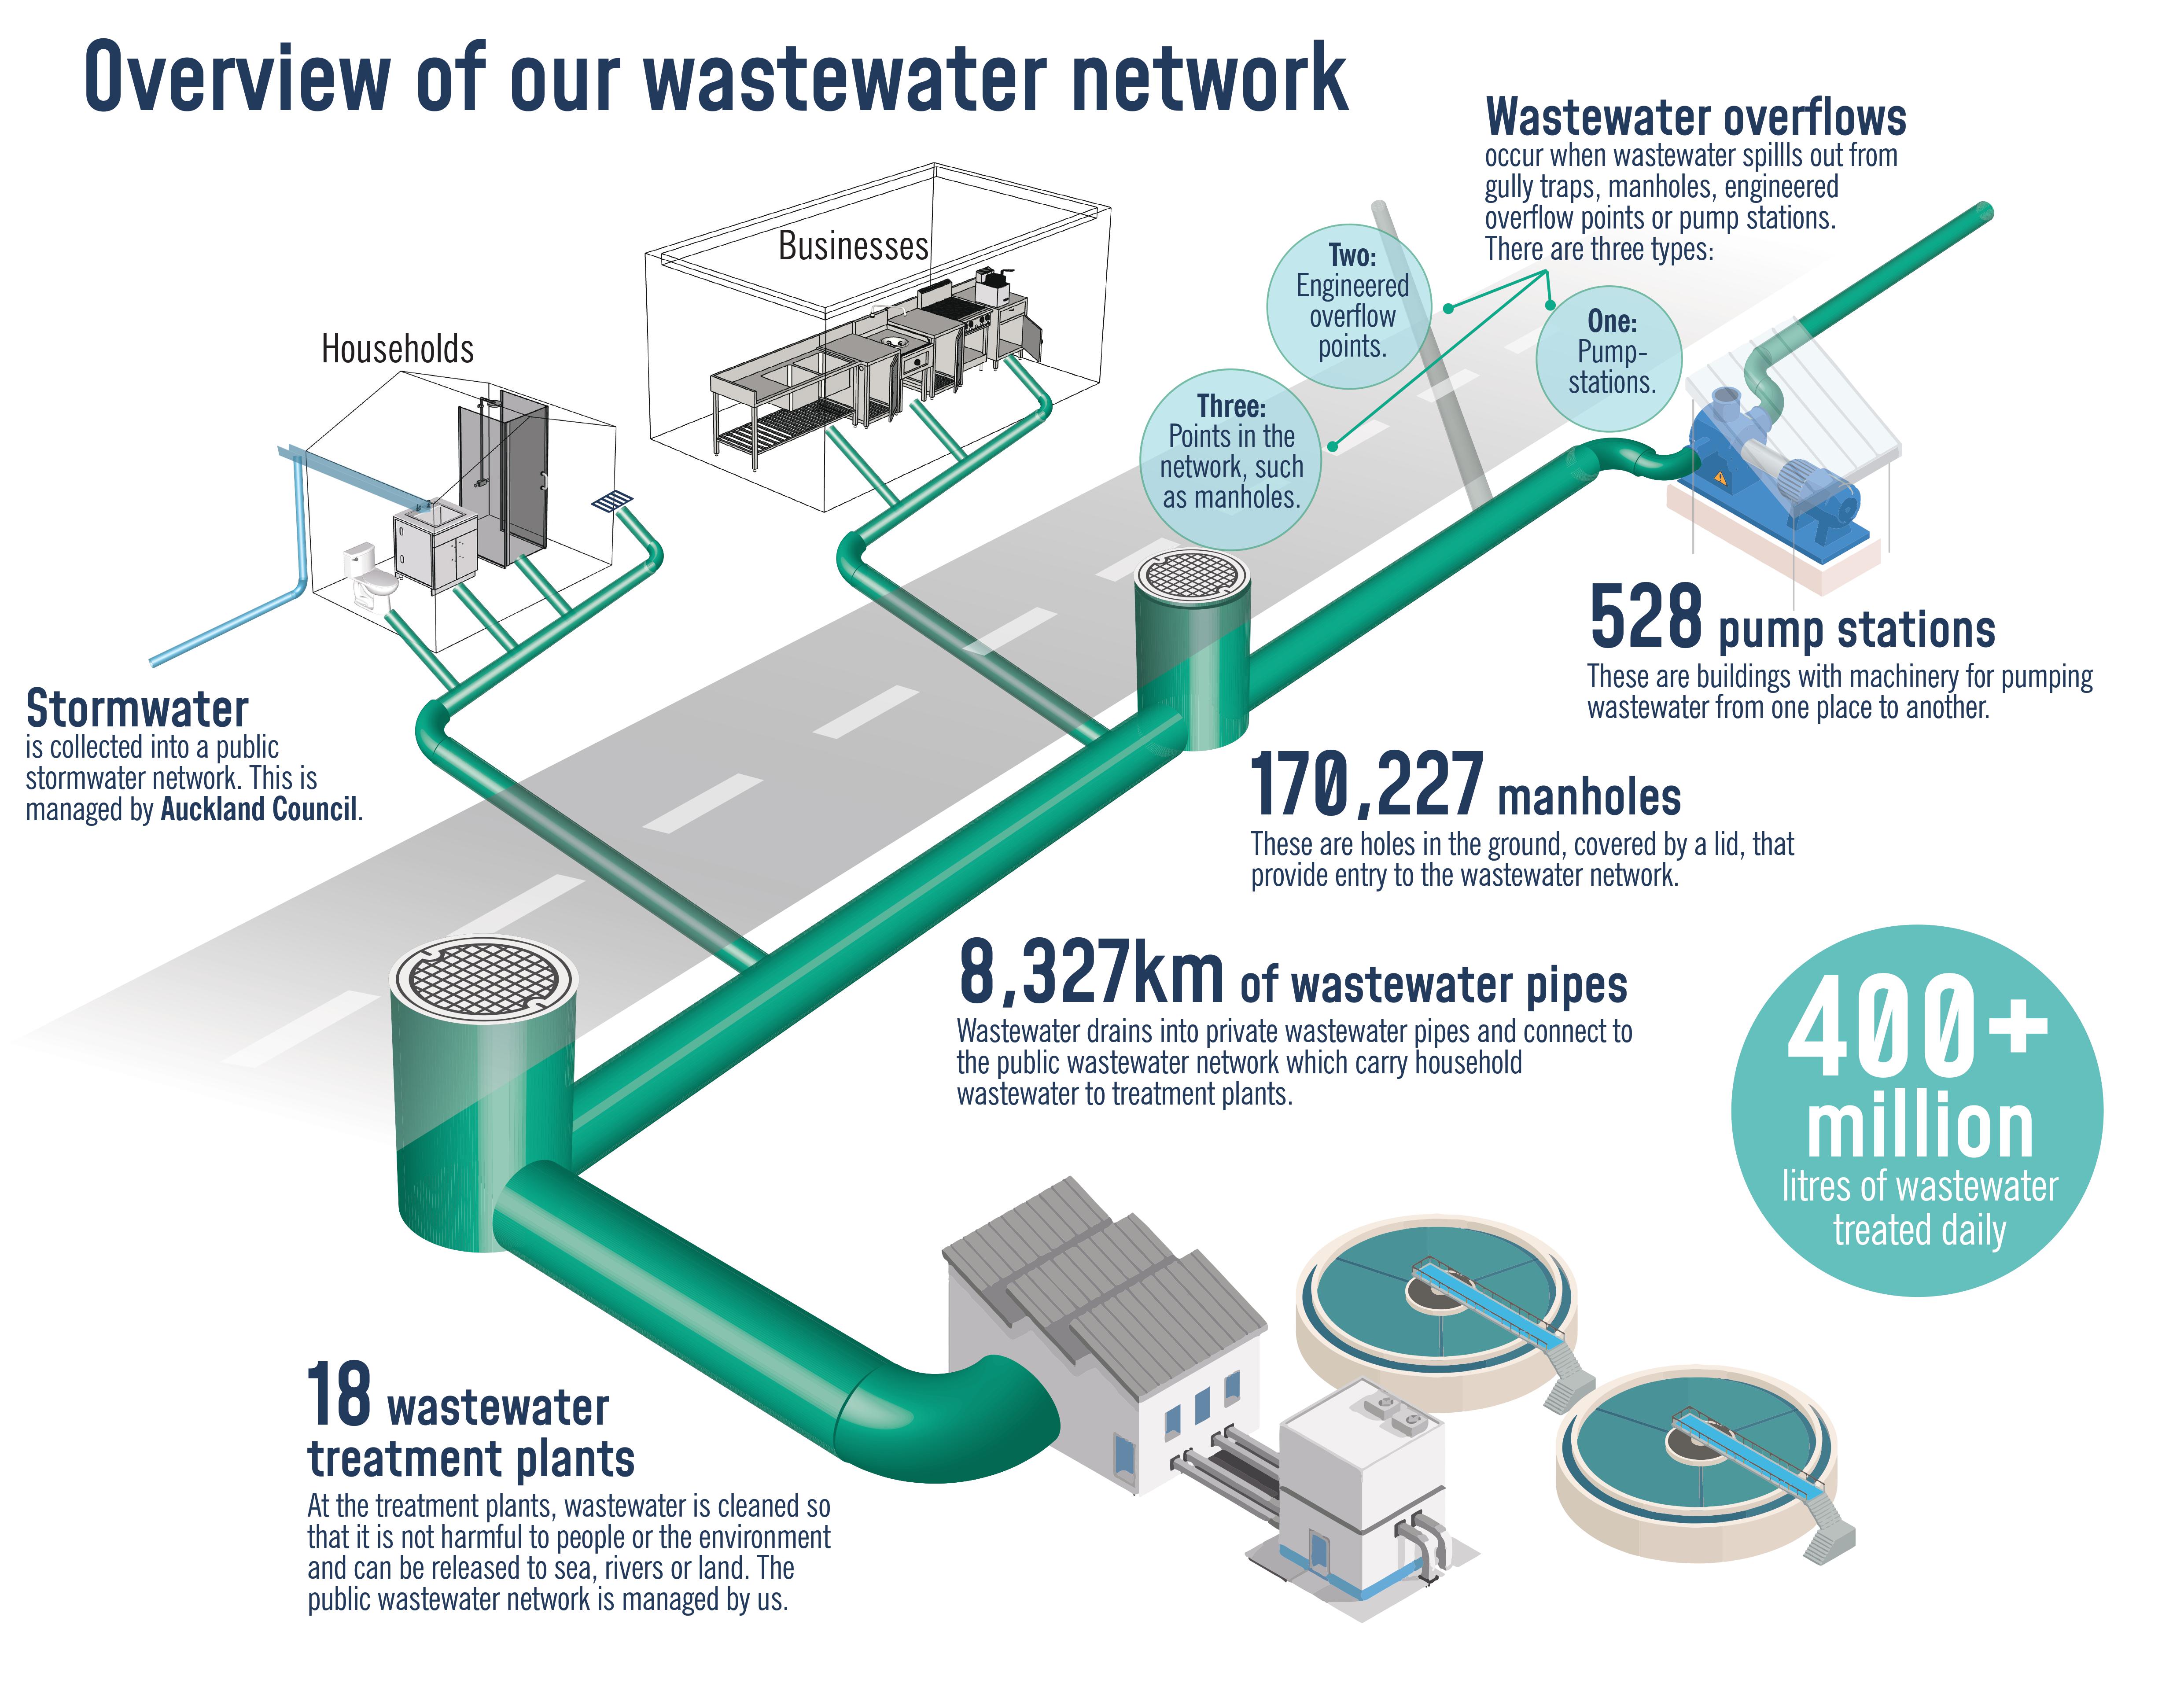 Wastewater network overview